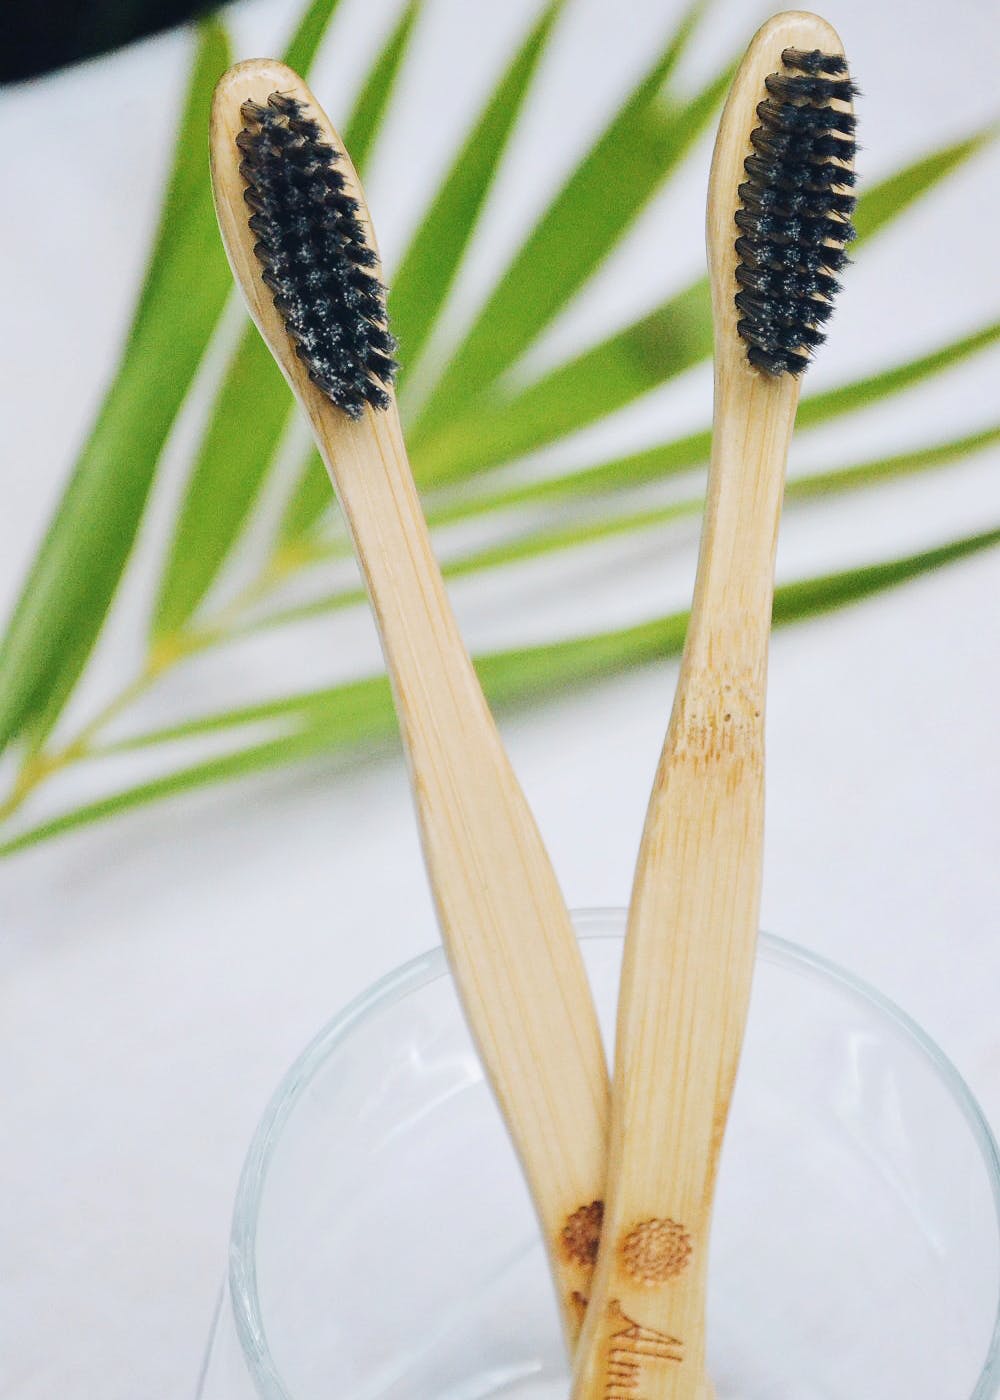 Bamboo Toothbrush - Charcoal (Pack of 2)